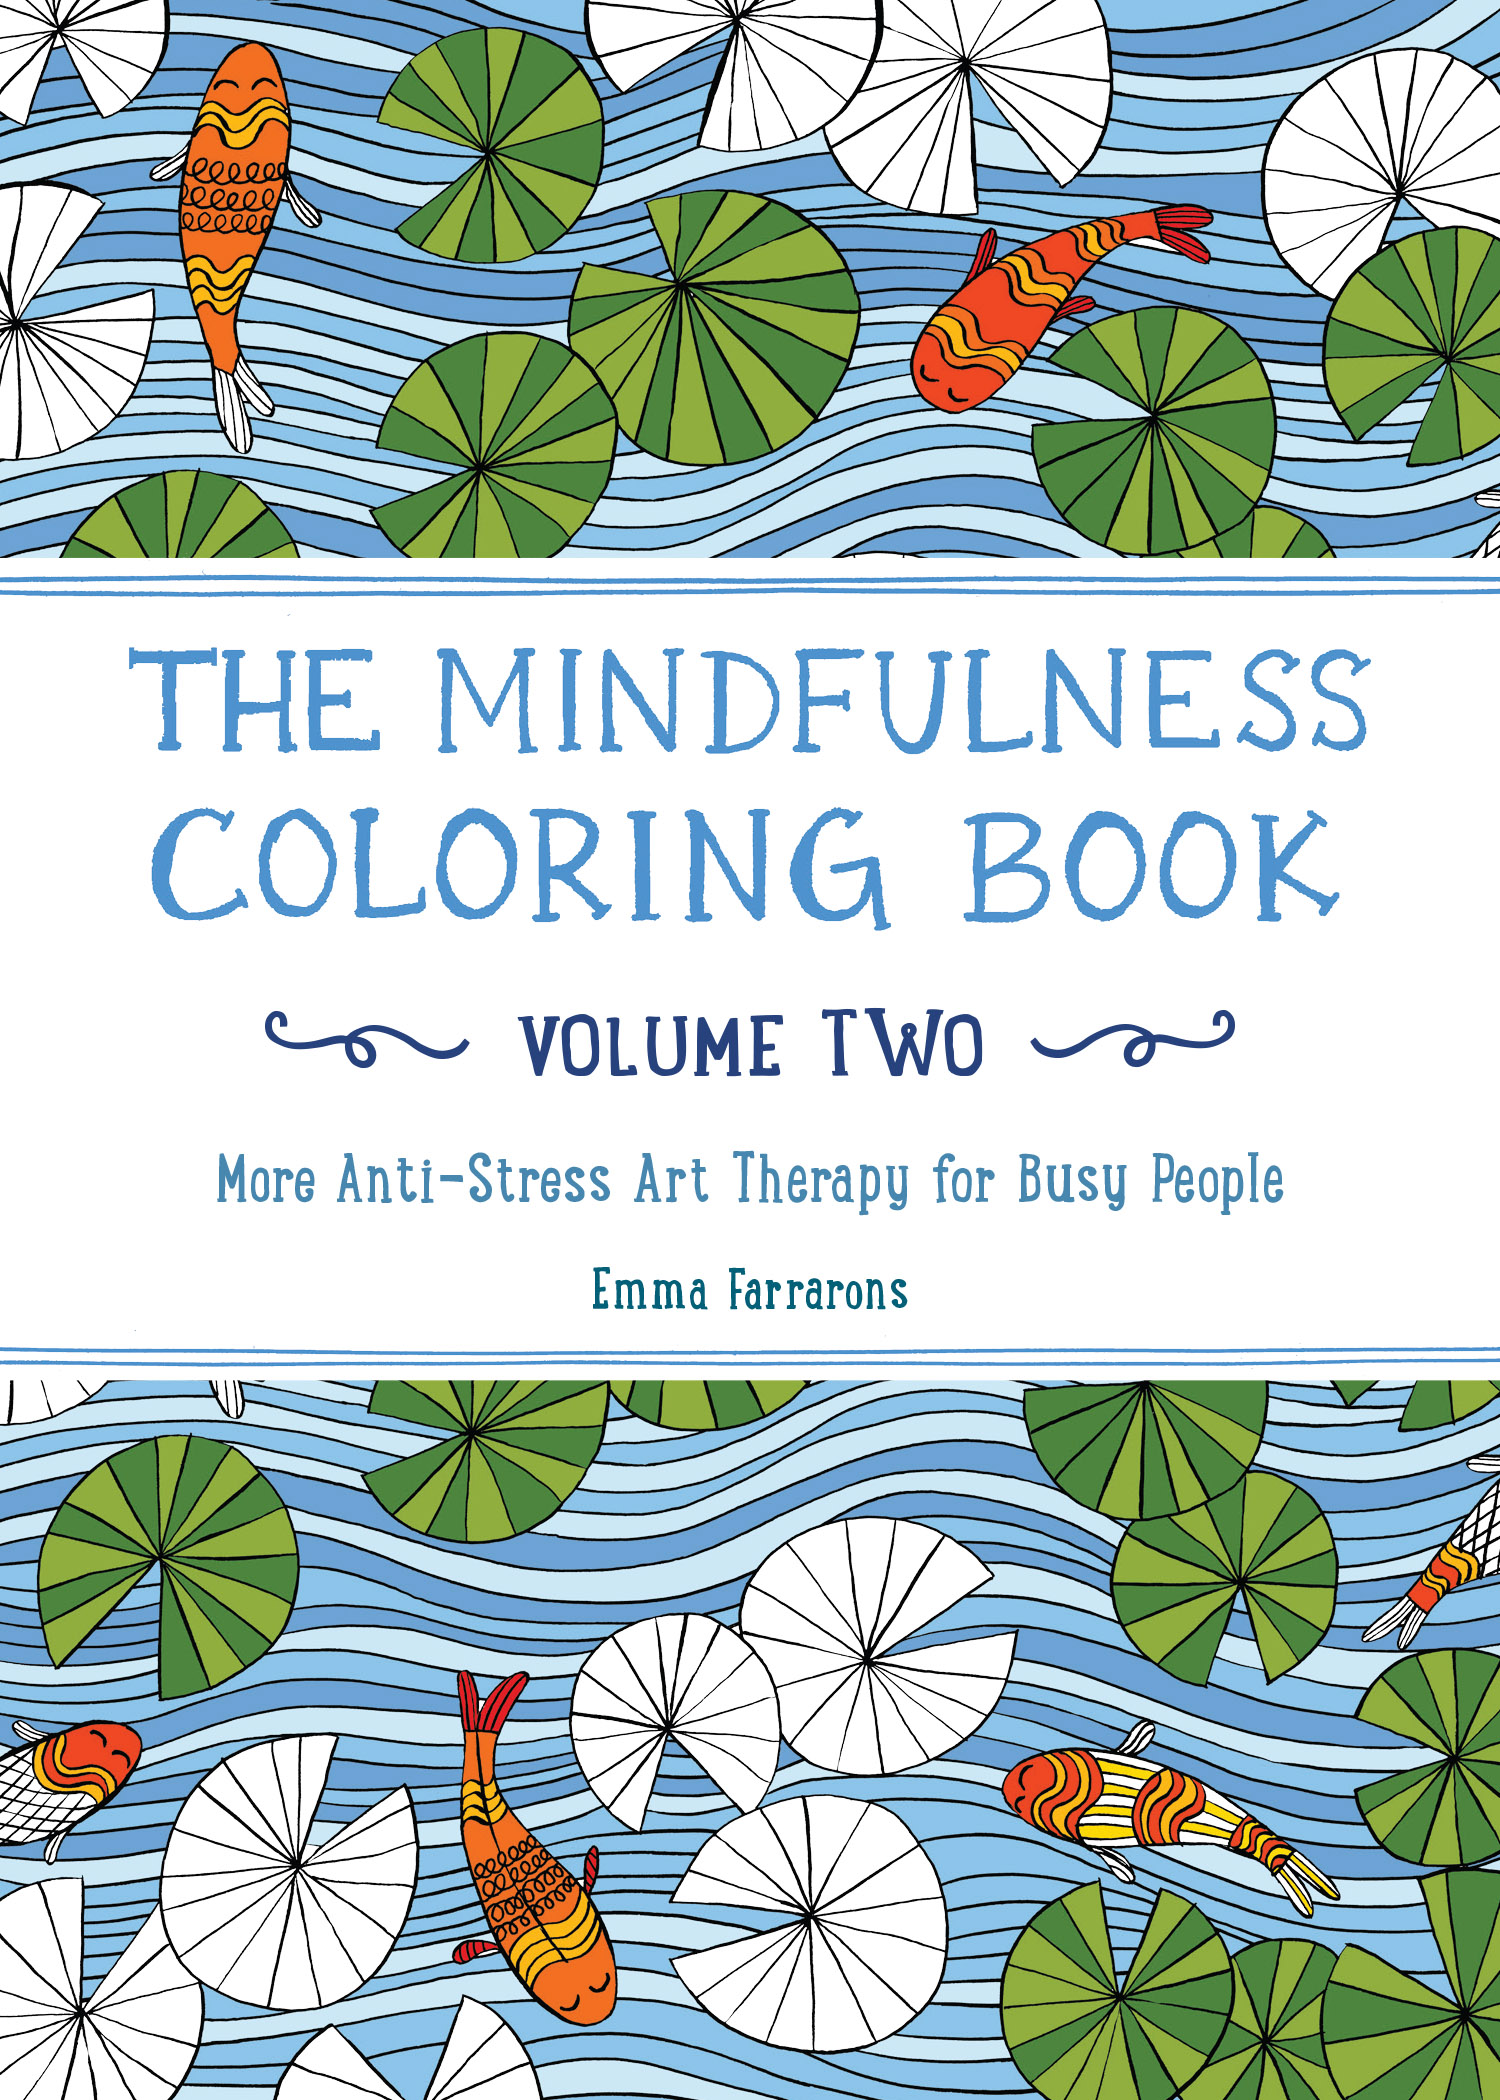 Tracing Book for Adults: Oodles of Doodles: Stress Relief and Relaxation: Mindful Tracing and Colouring Book for Adults Full of Doodles, Robots, and